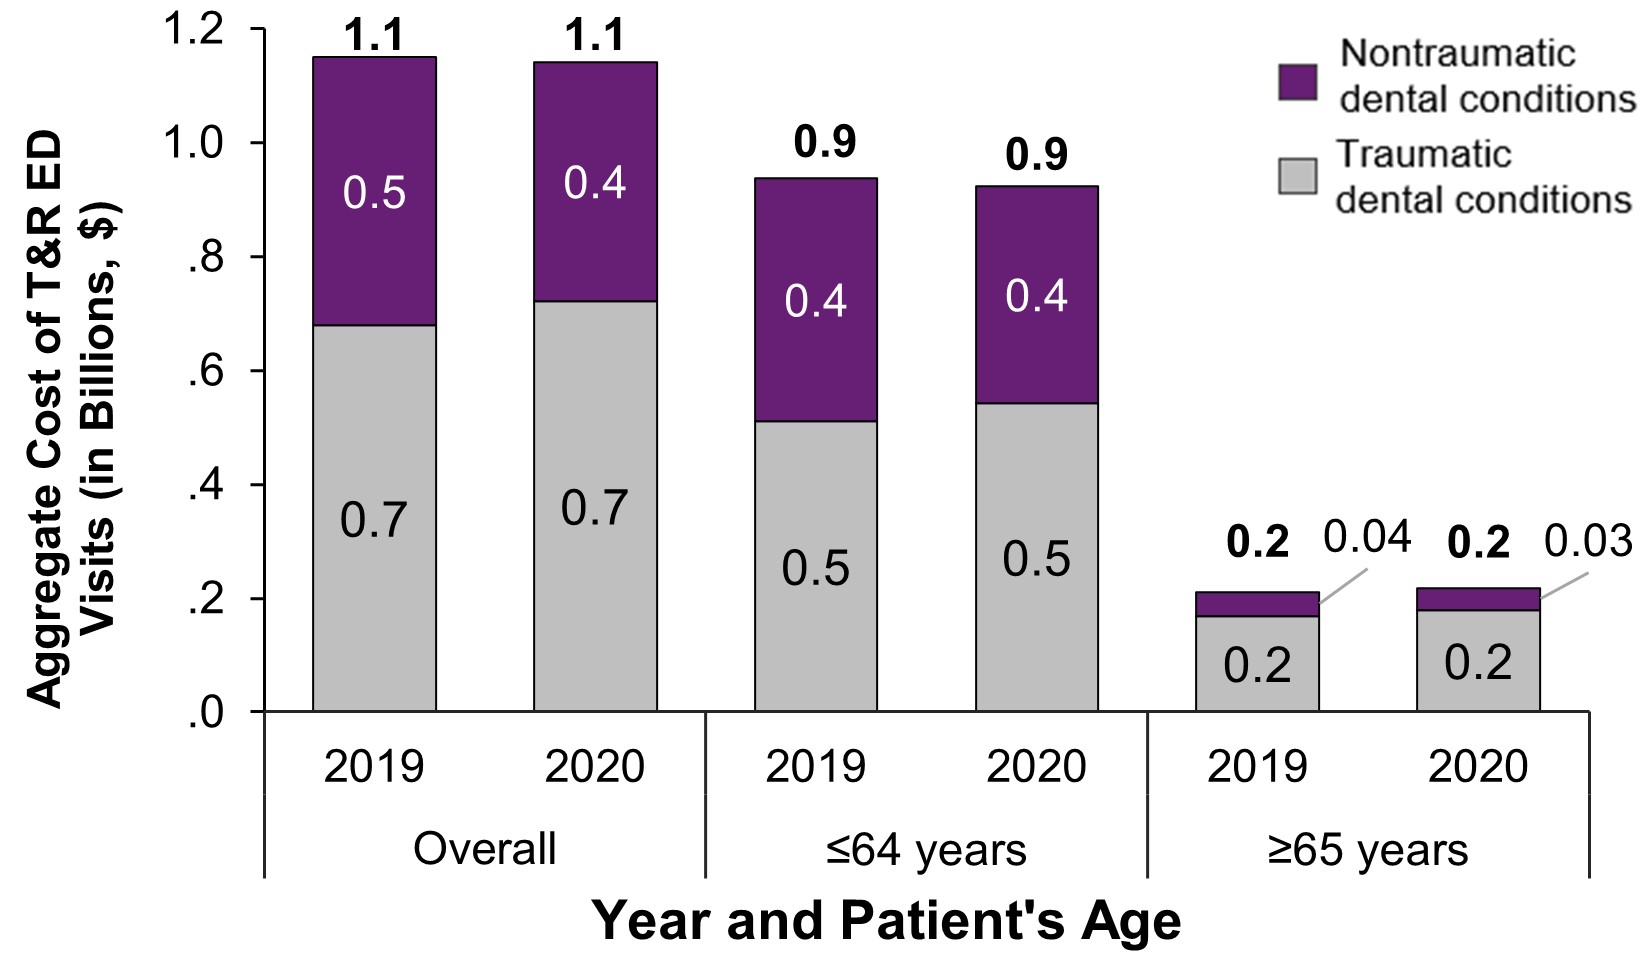 Aggregate cost in billions of treat-and-release ED visits for dental conditions, overall and by age group and traumatic vs. nontraumatic conditions, 2019 and 2020